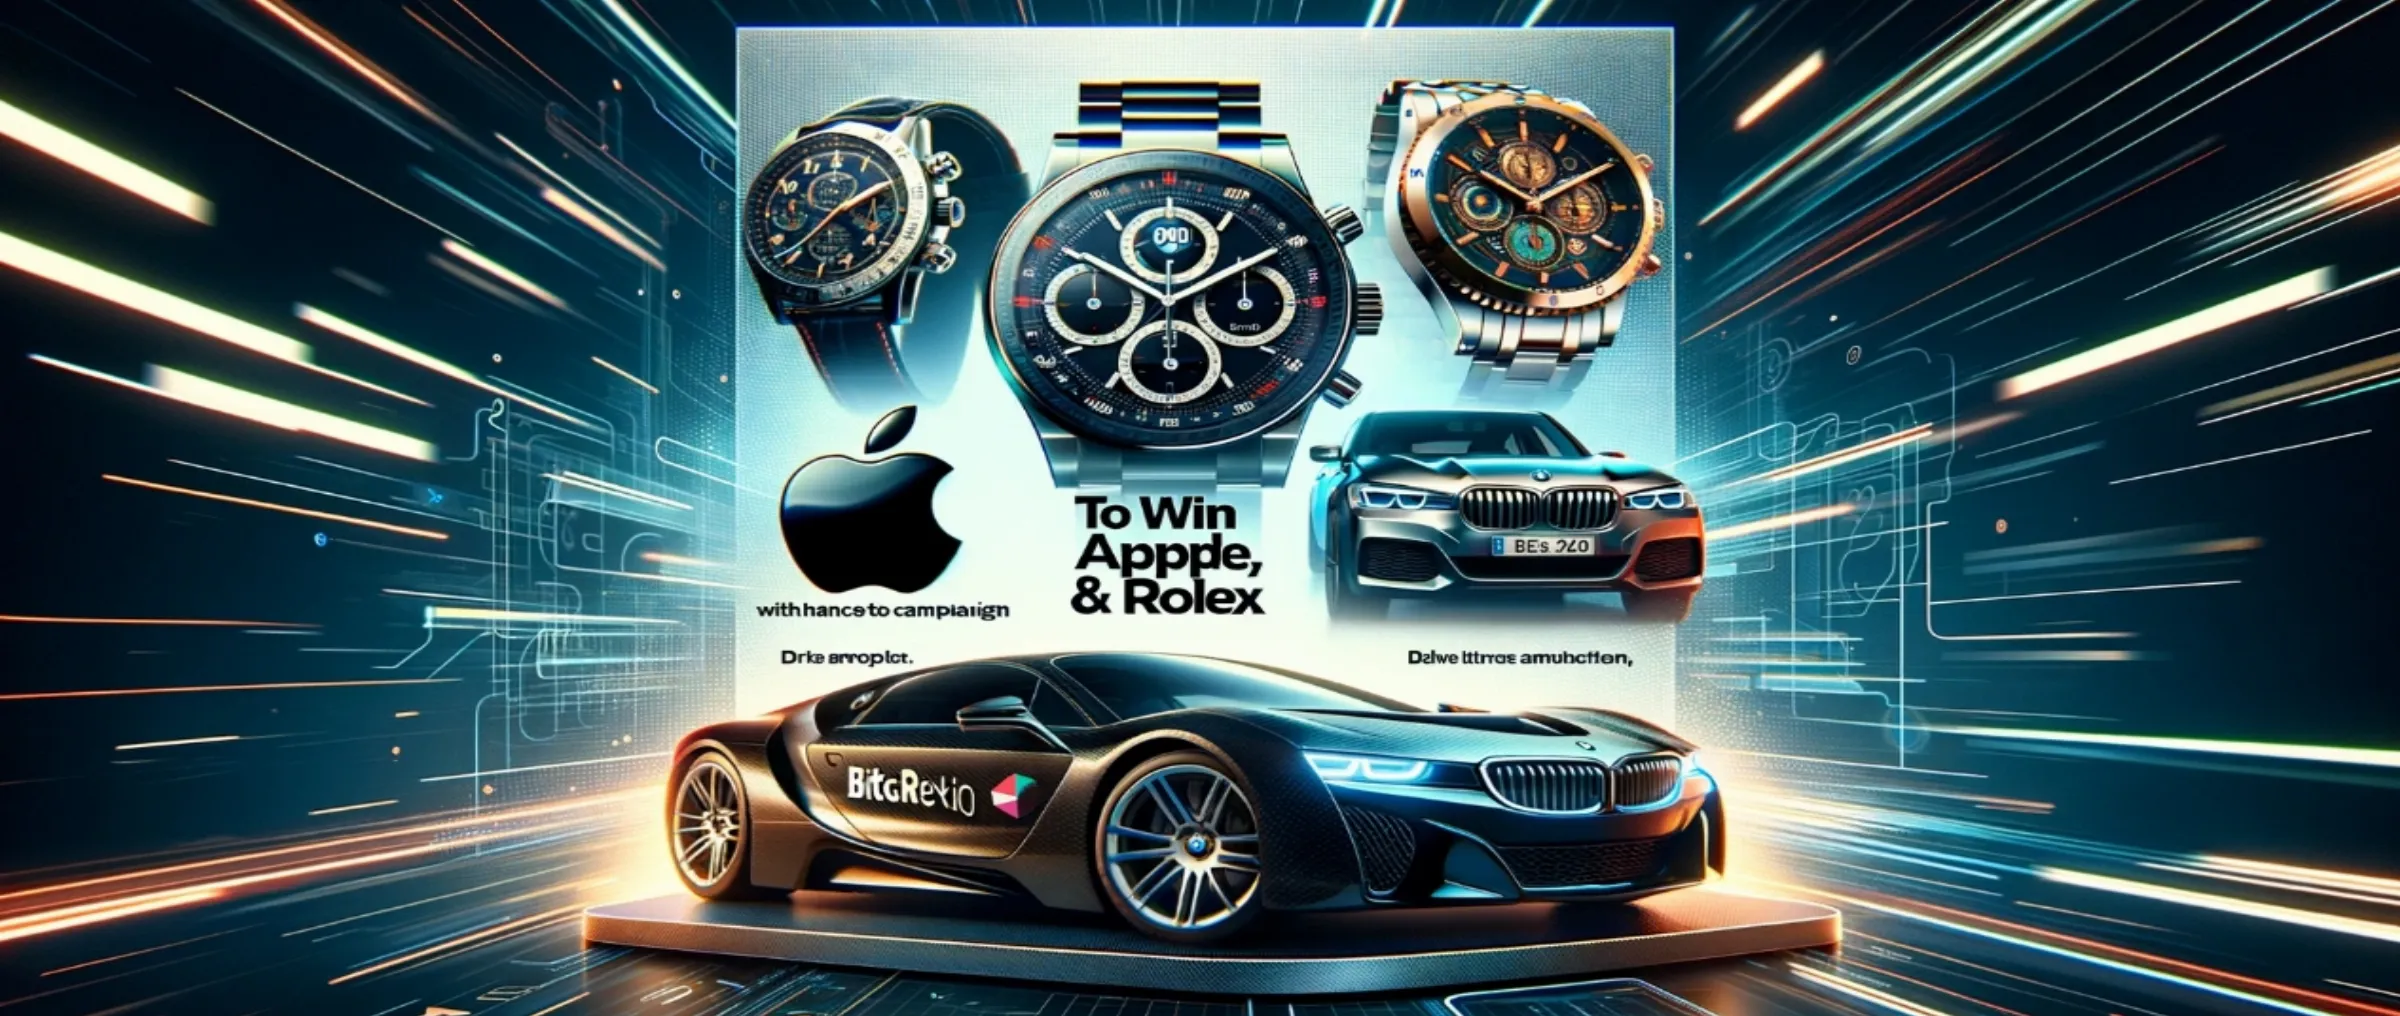 Bitget launches a promotion with a chance to win Apple, BMW and Rolex